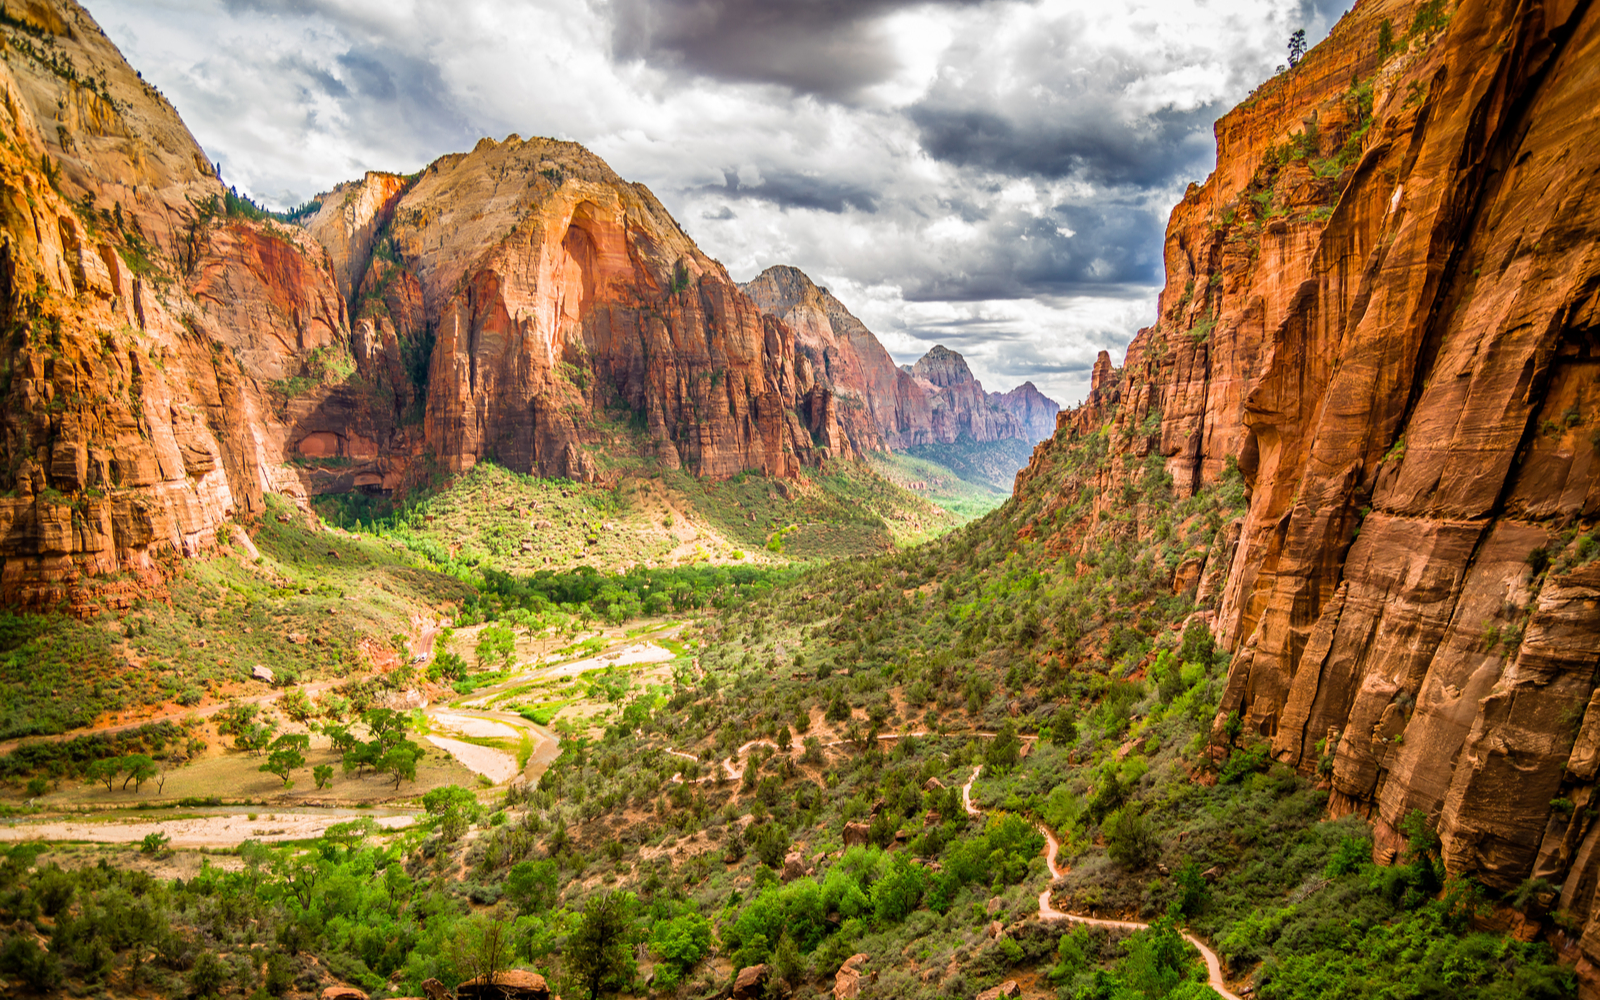 The Best Time to Visit Zion National Park in 2022